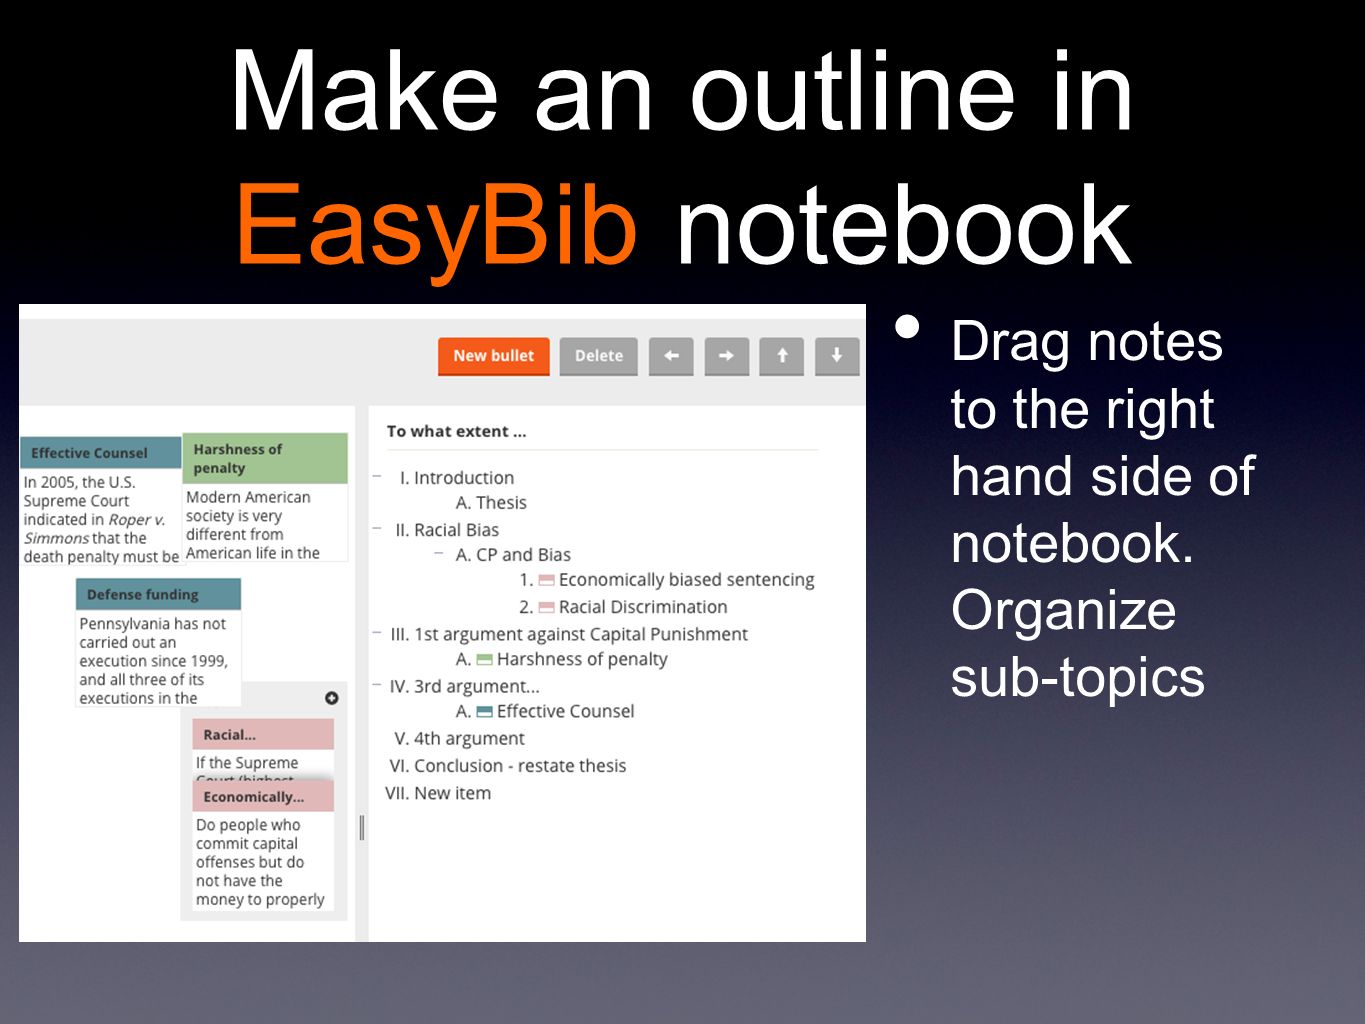 Make an outline in EasyBib notebook Drag notes to the right hand side of notebook.